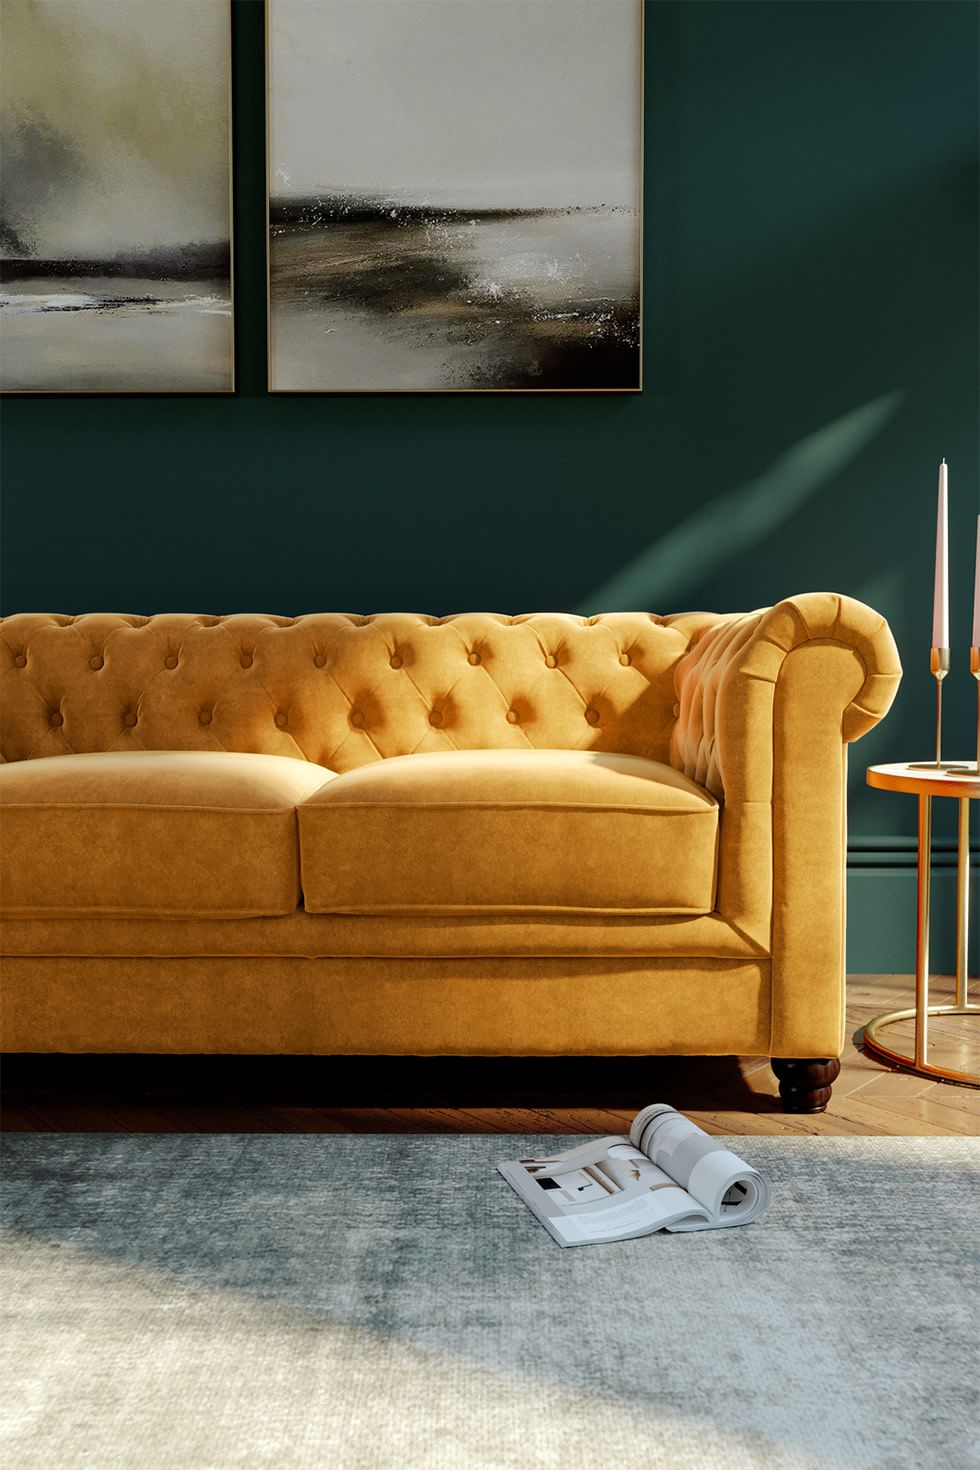 Dark green living room with mustard Chesterfield sofa